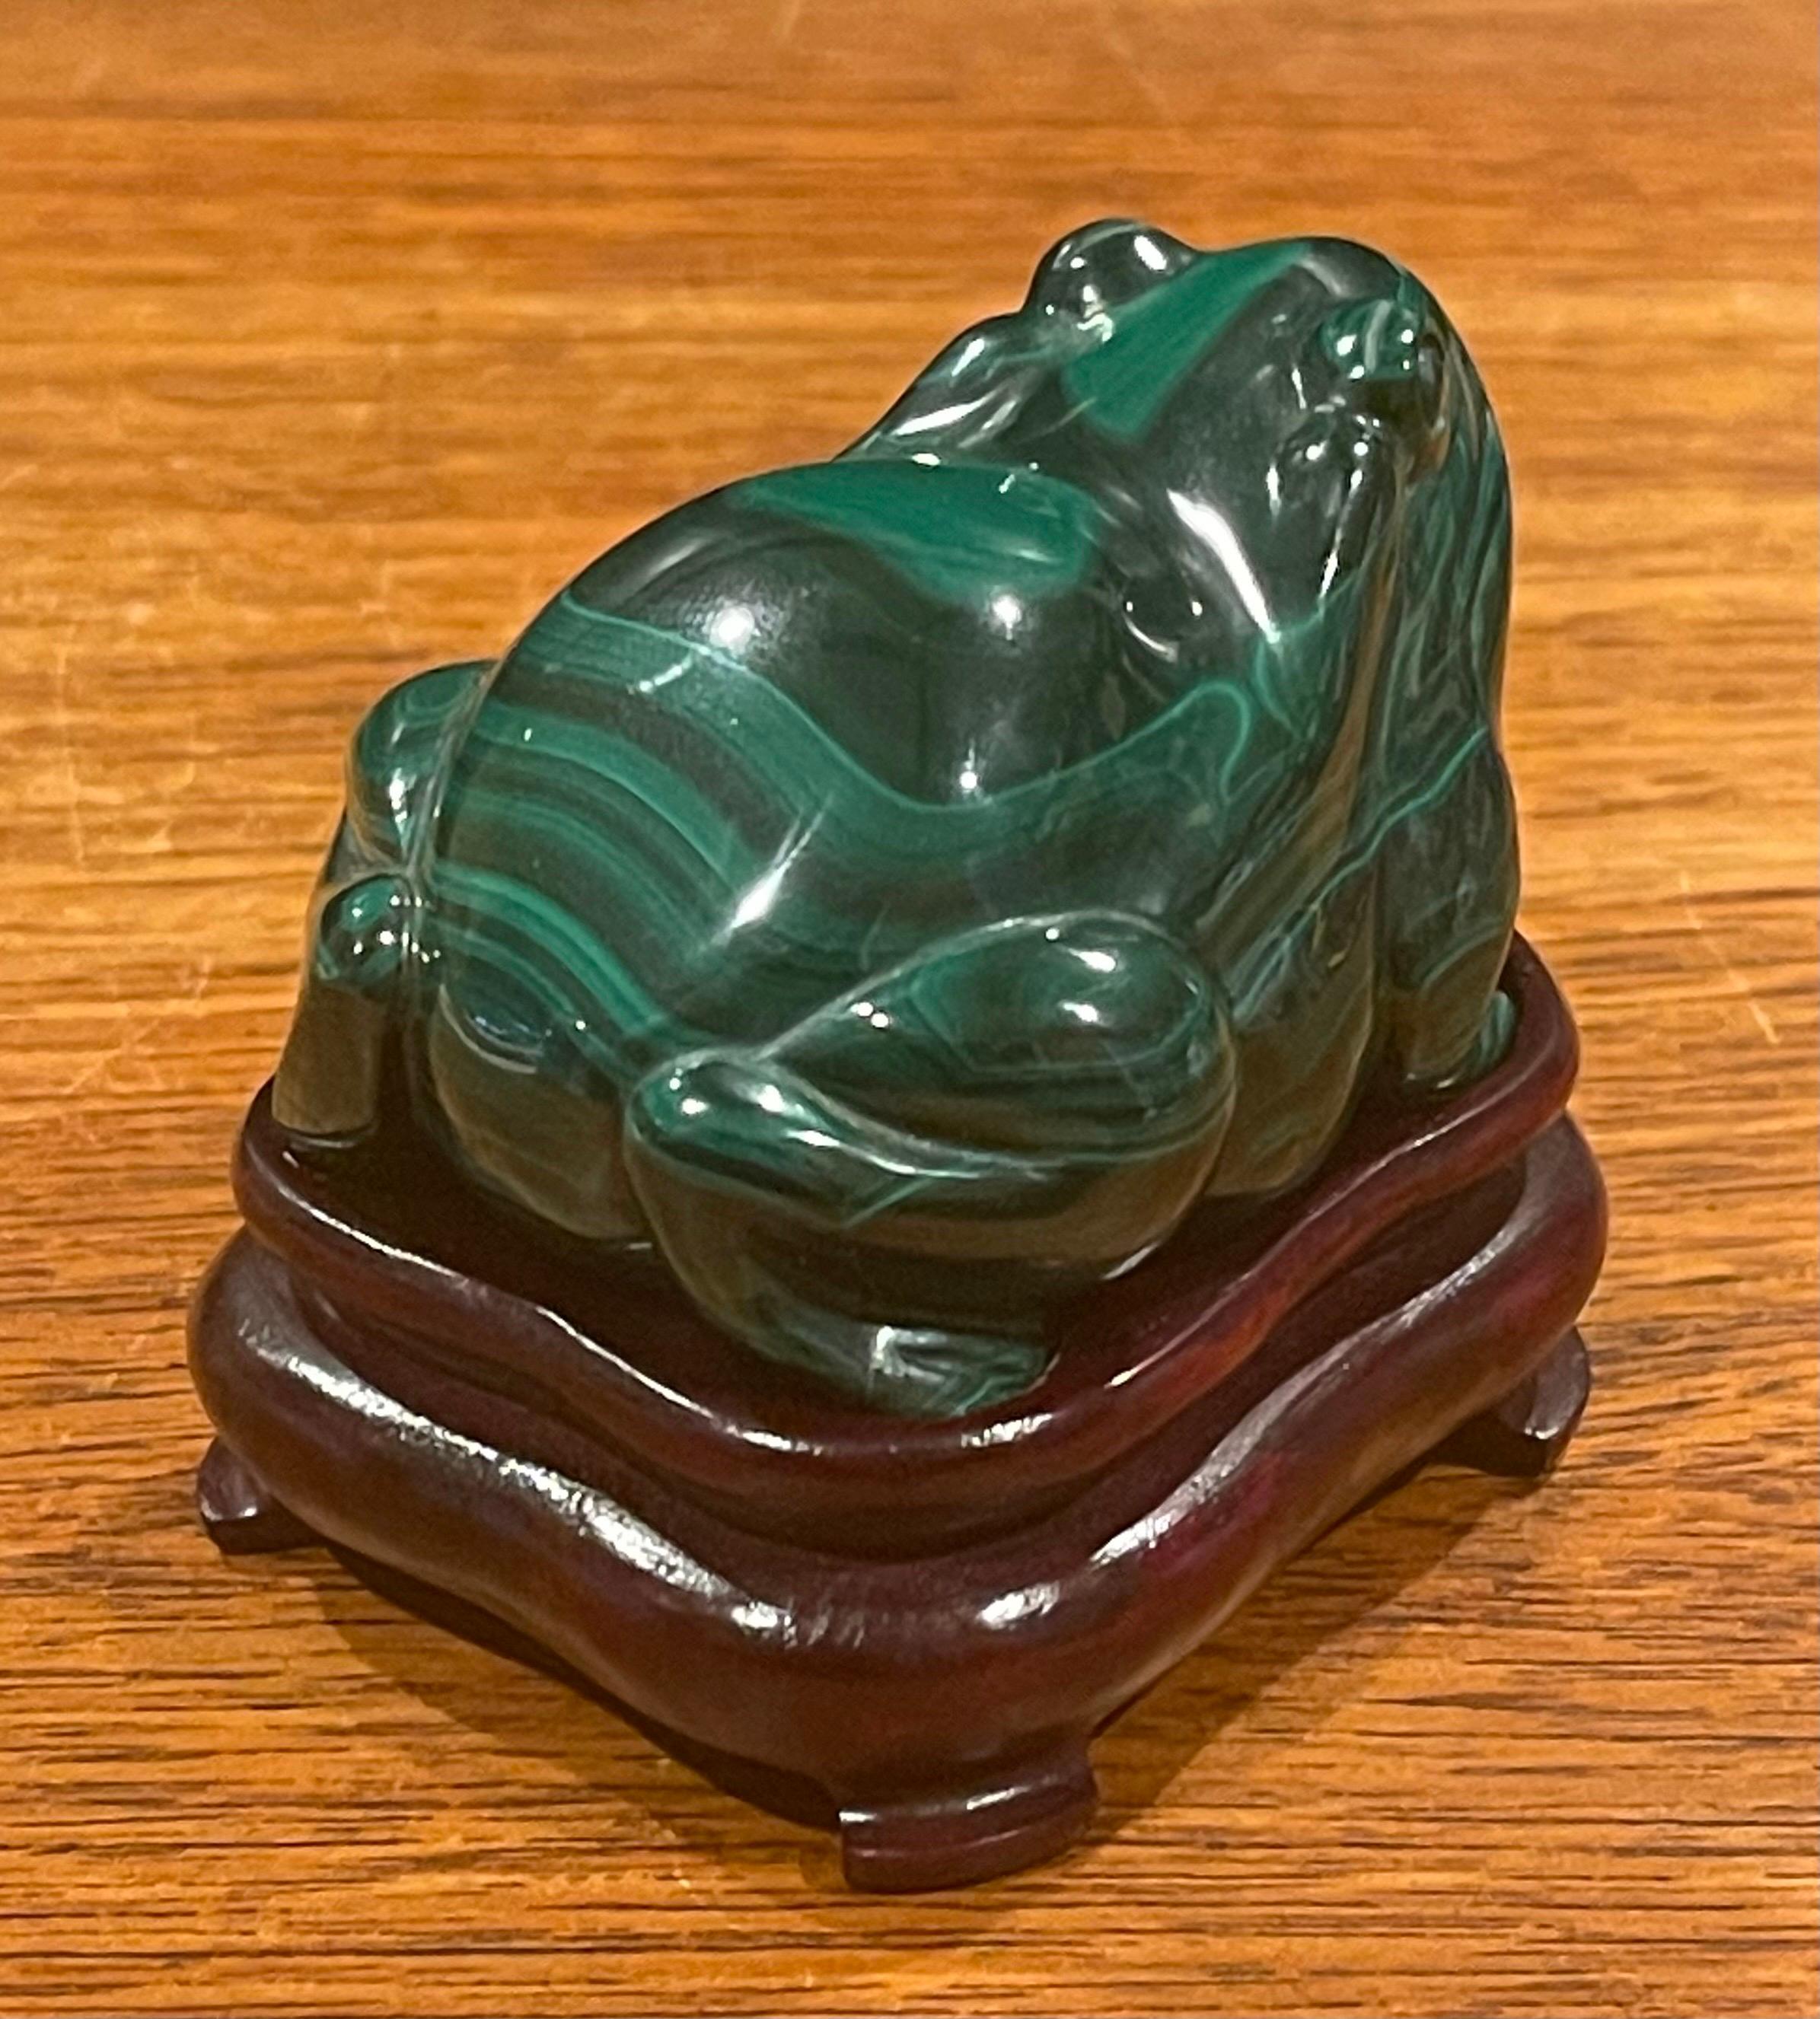 20th Century Hand Carved Chinese Malachite Frog / Toad Sculpture on Base